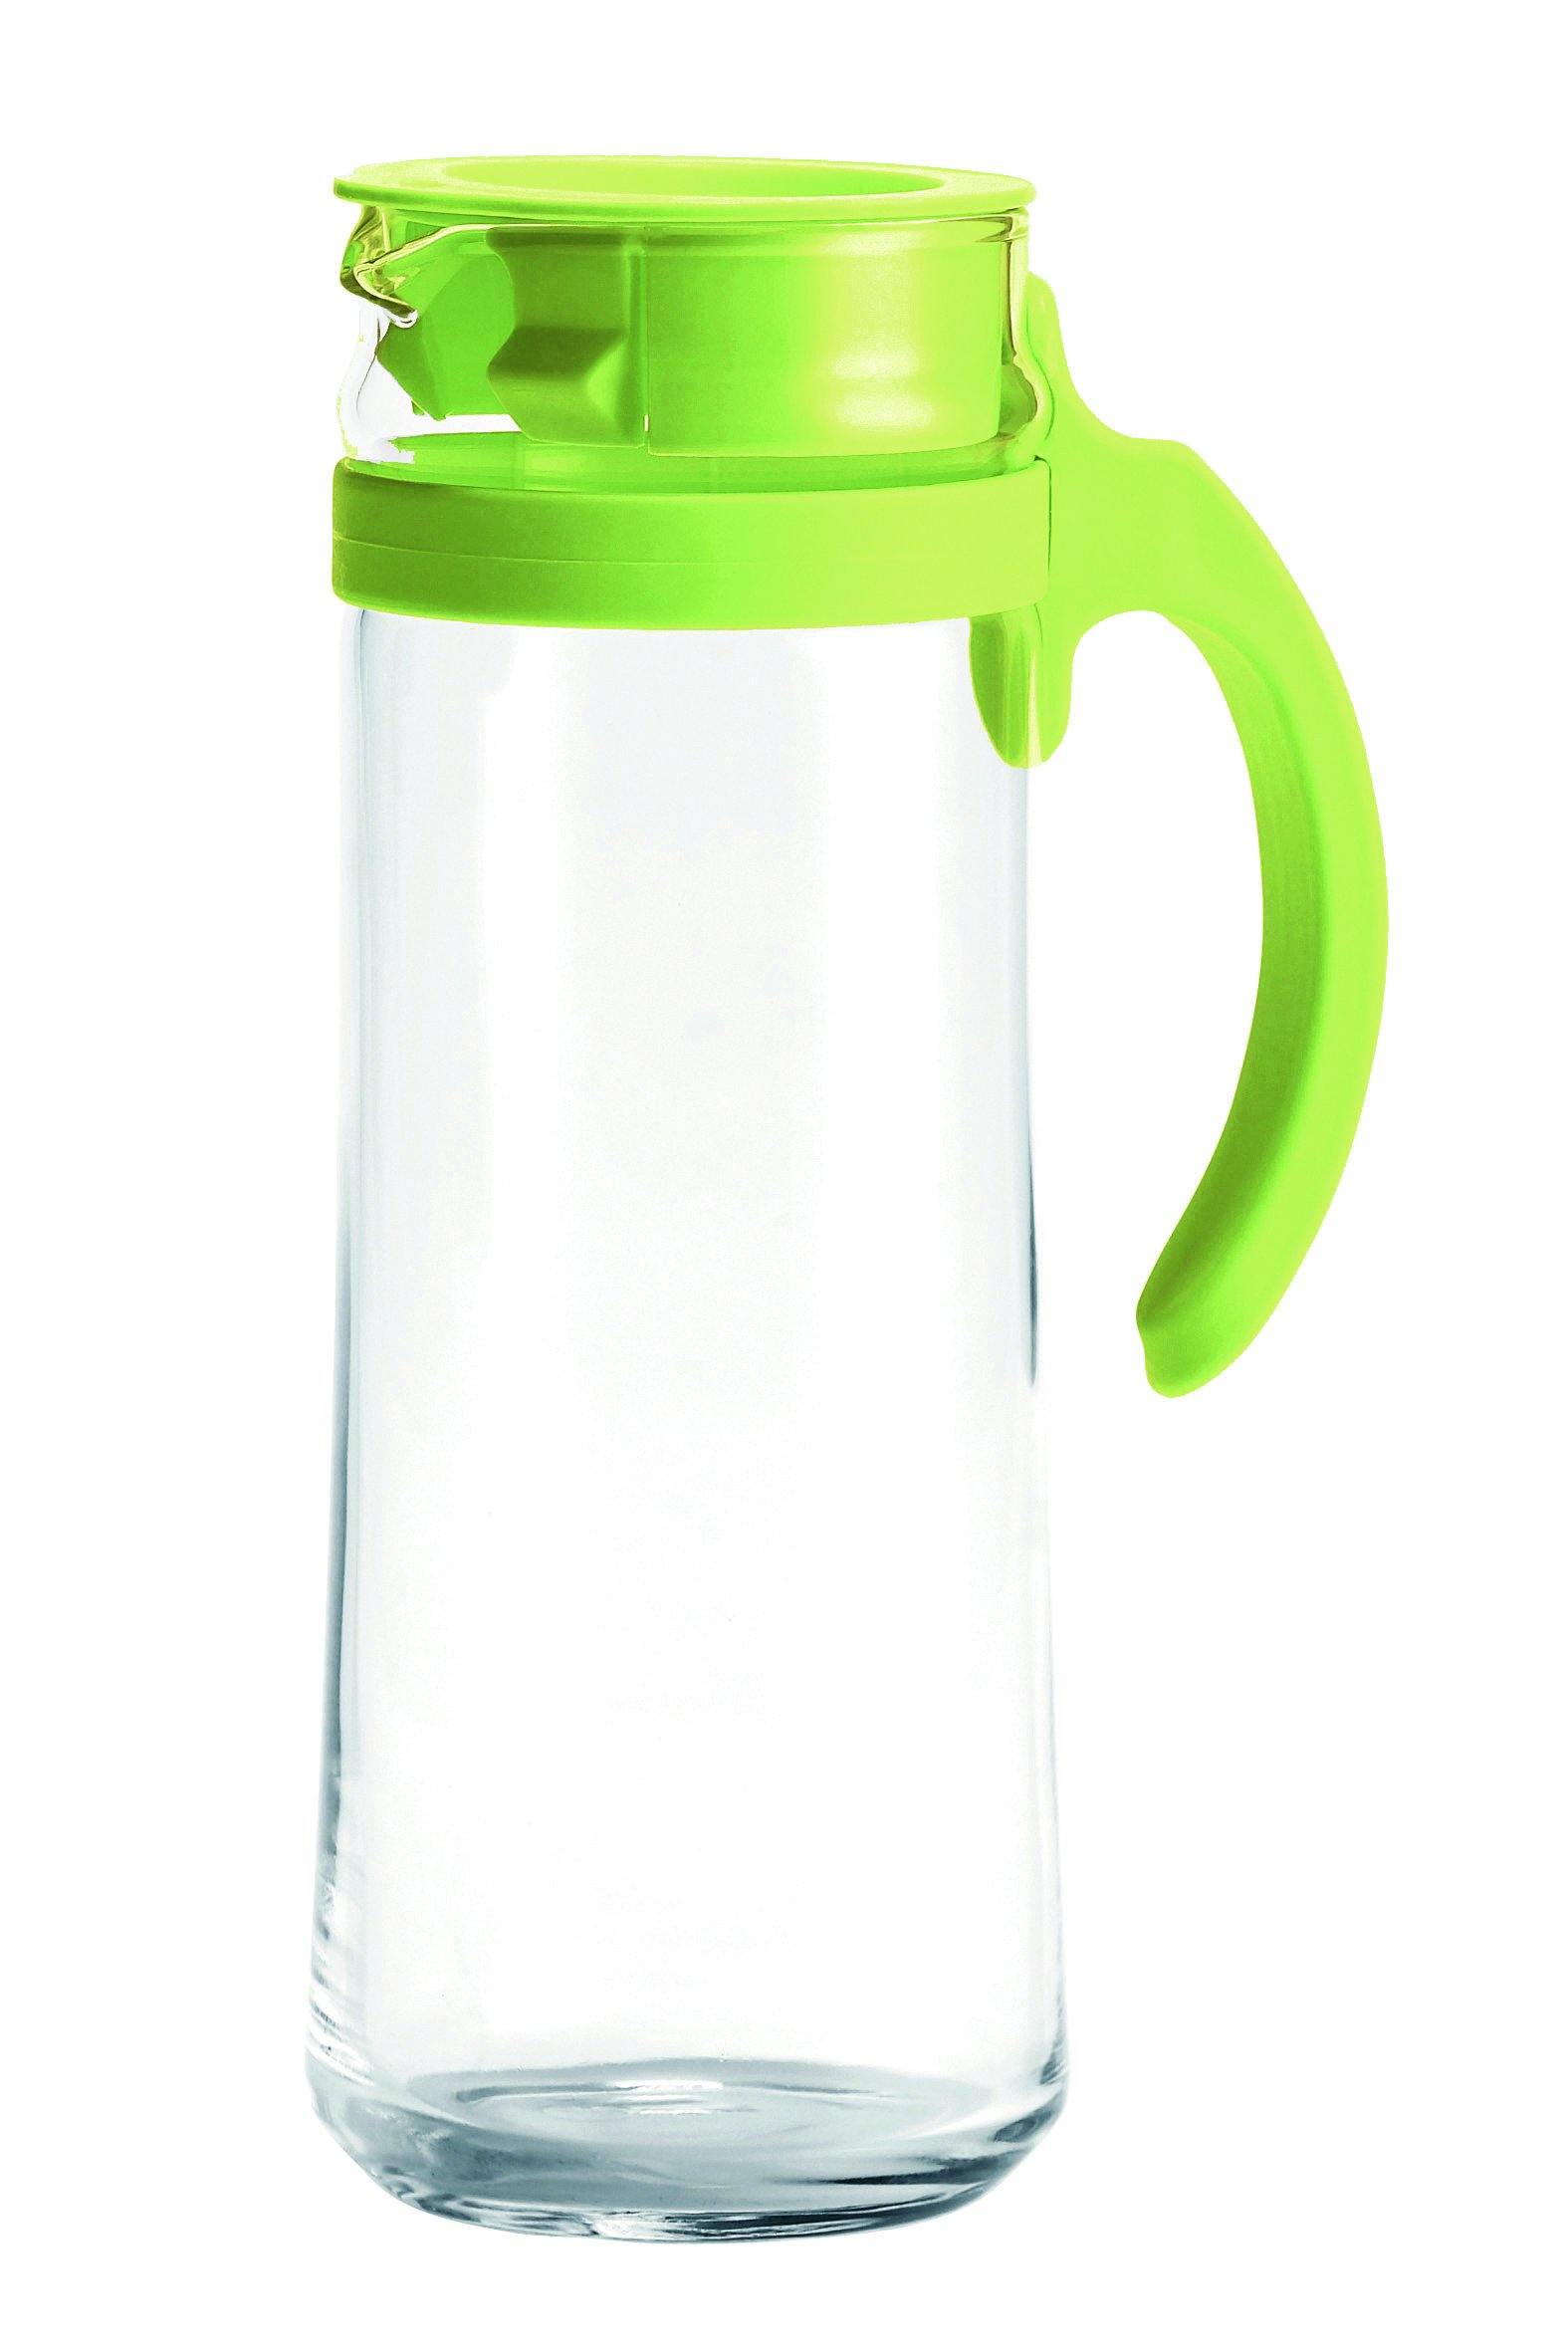 Ocean Patio Pitcher Green, 1265 ml - Whole and All